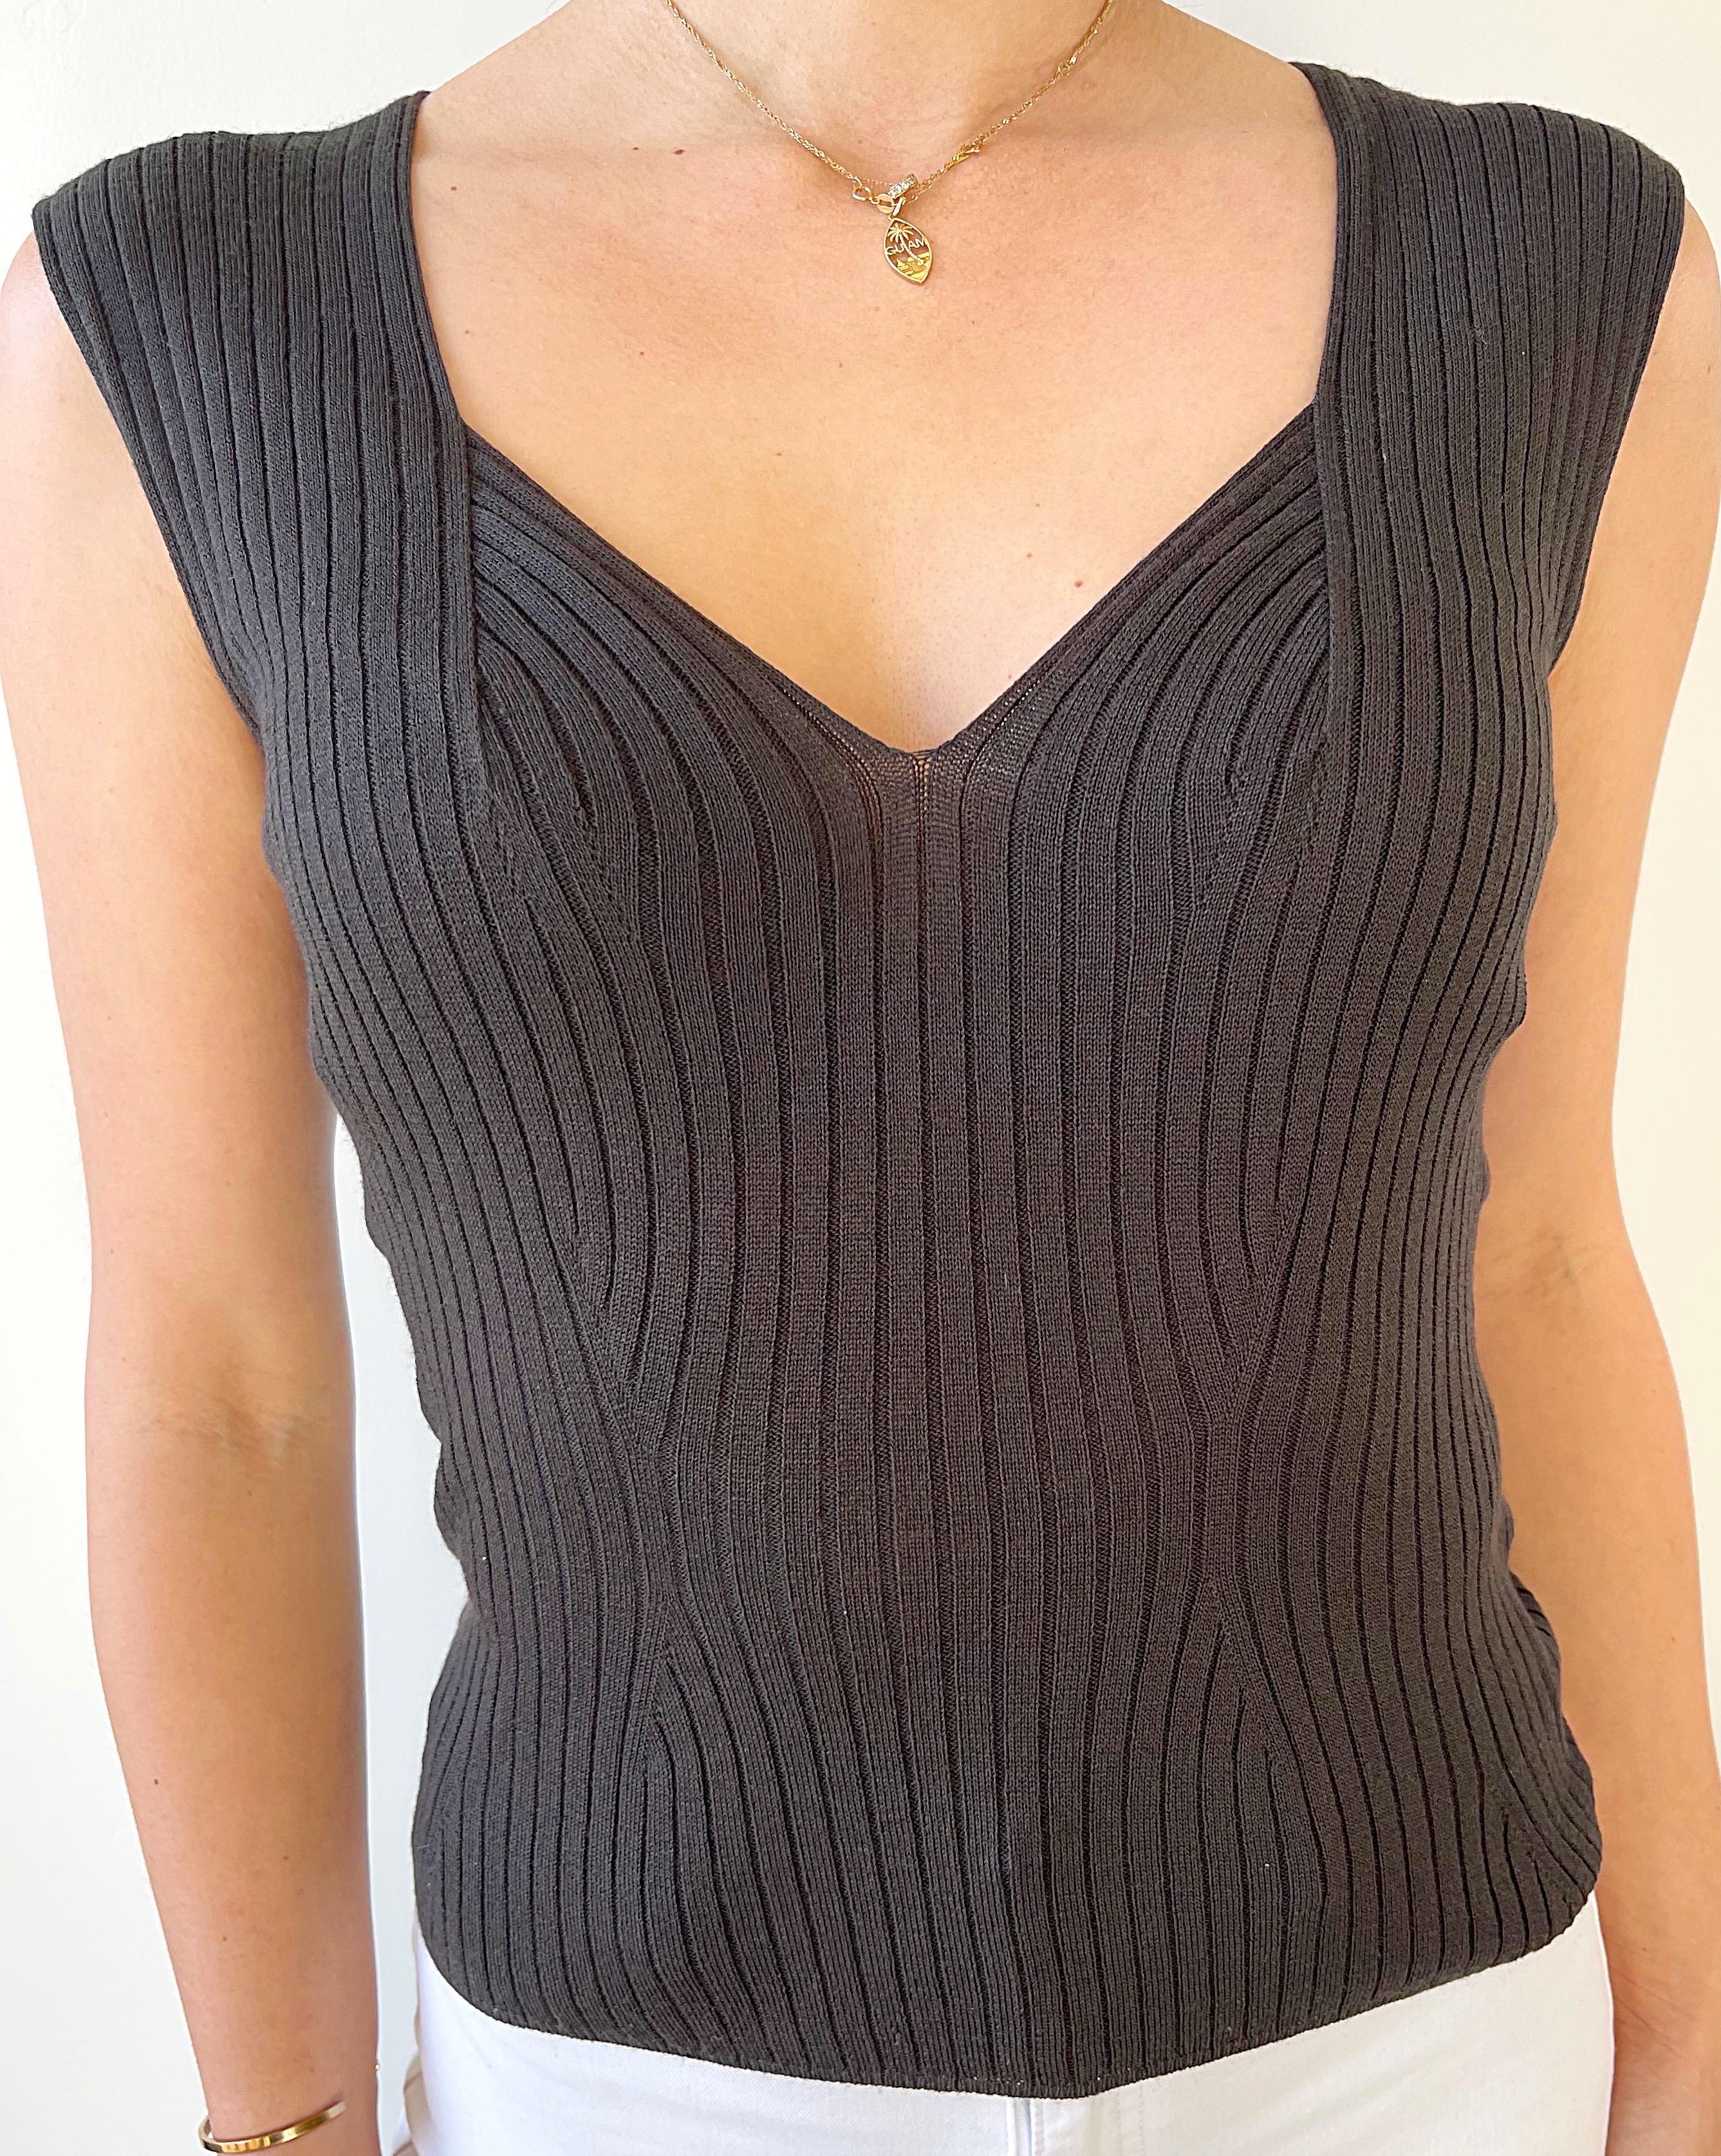 Yves Saint Laurent by Tom Ford Spring 2003 Brown Ribbed Sleeveless Vintage Top For Sale 4